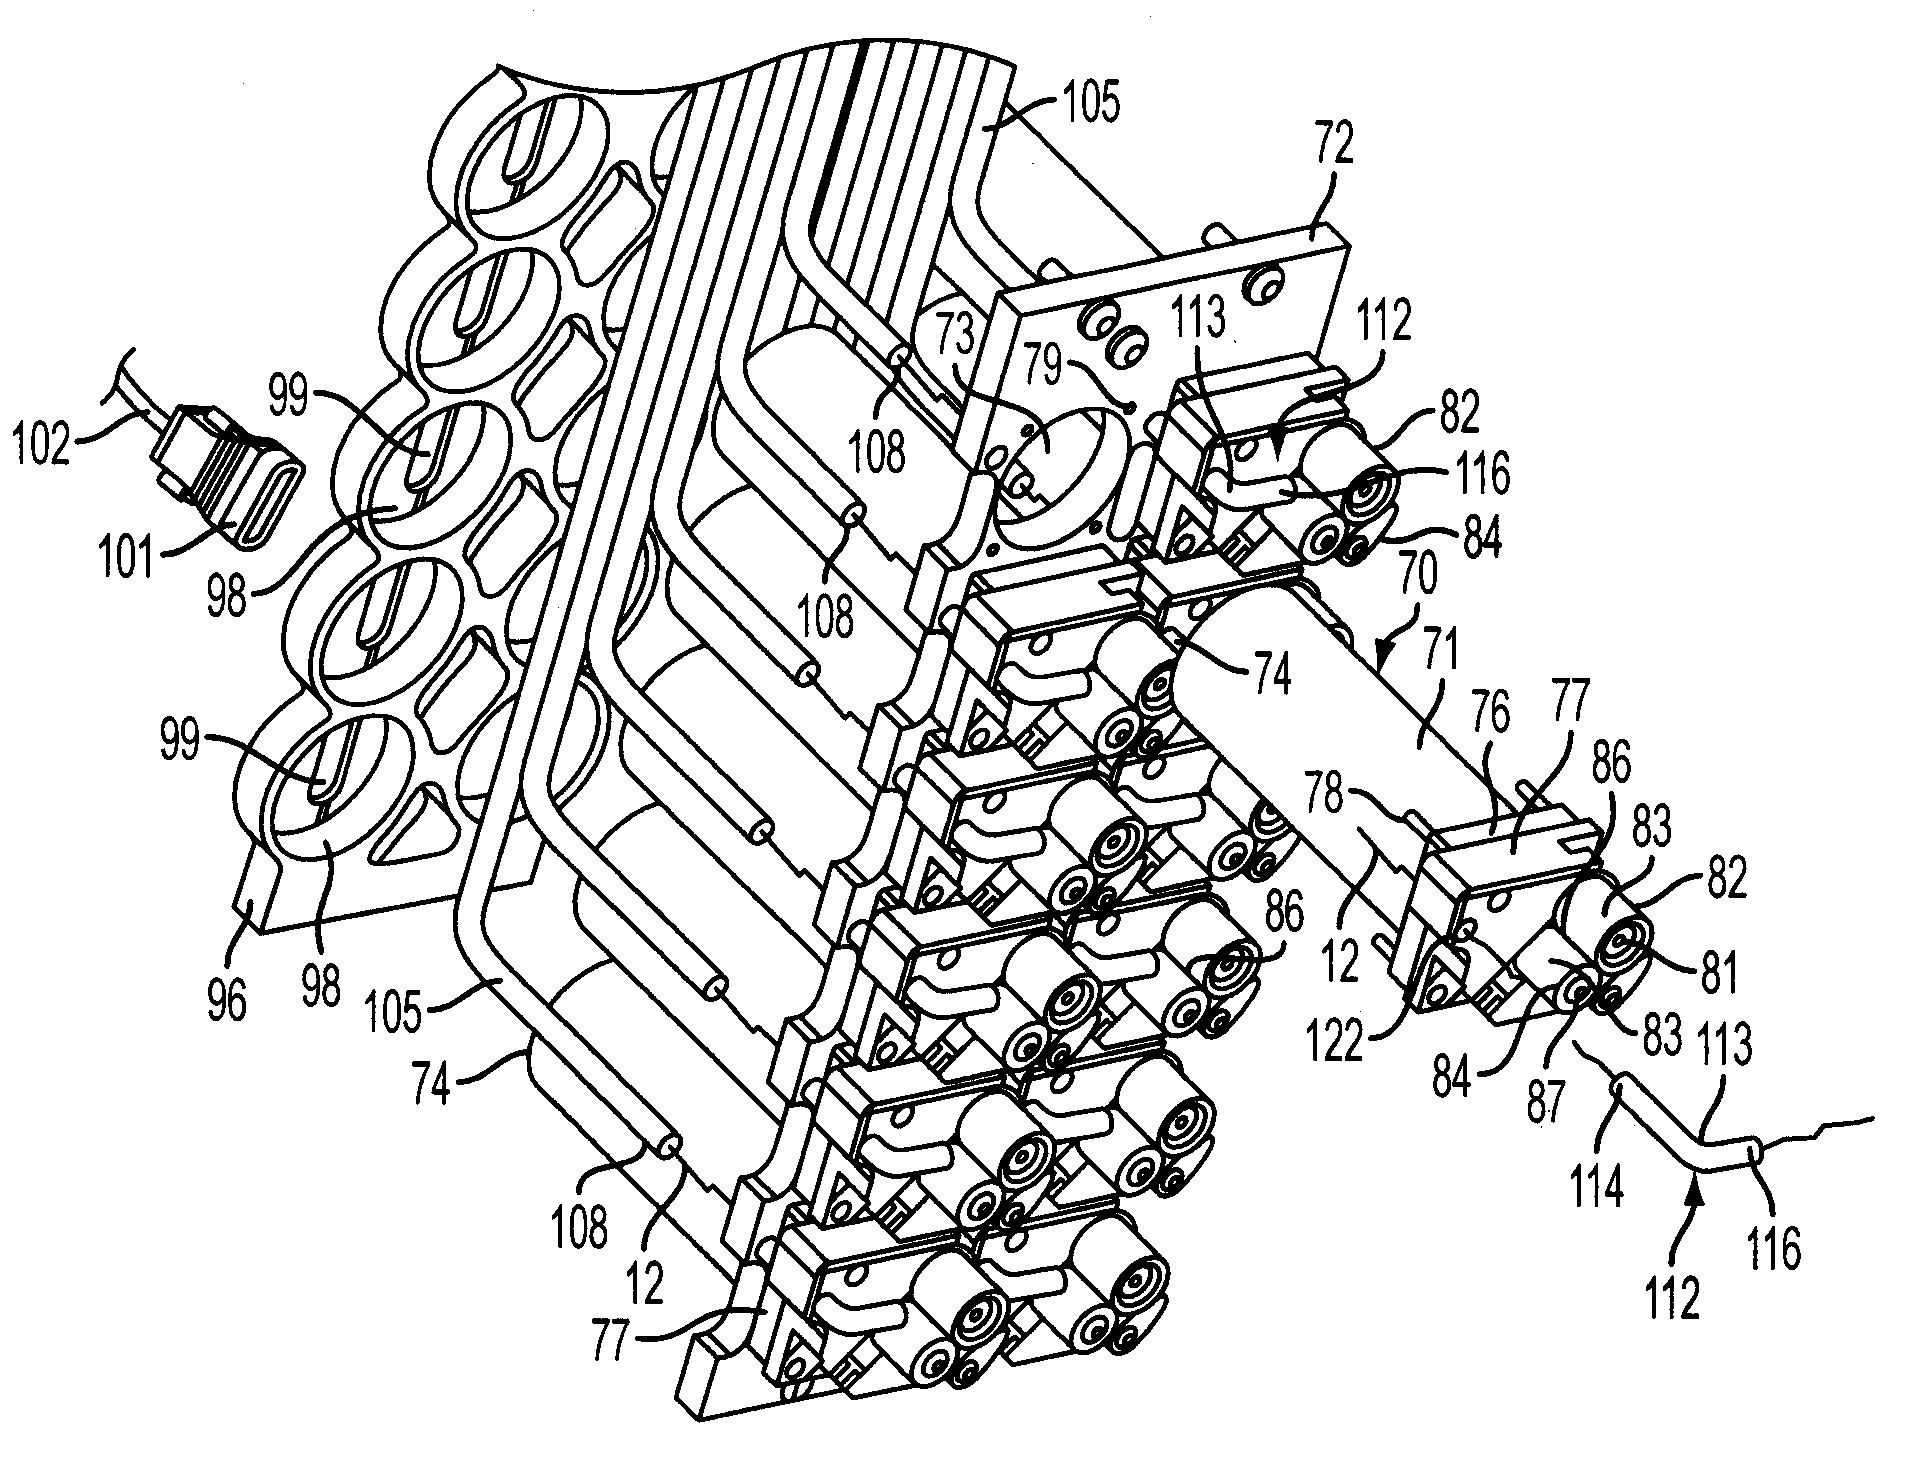 Integrated motor drive system for motor driven yarn feed attachments